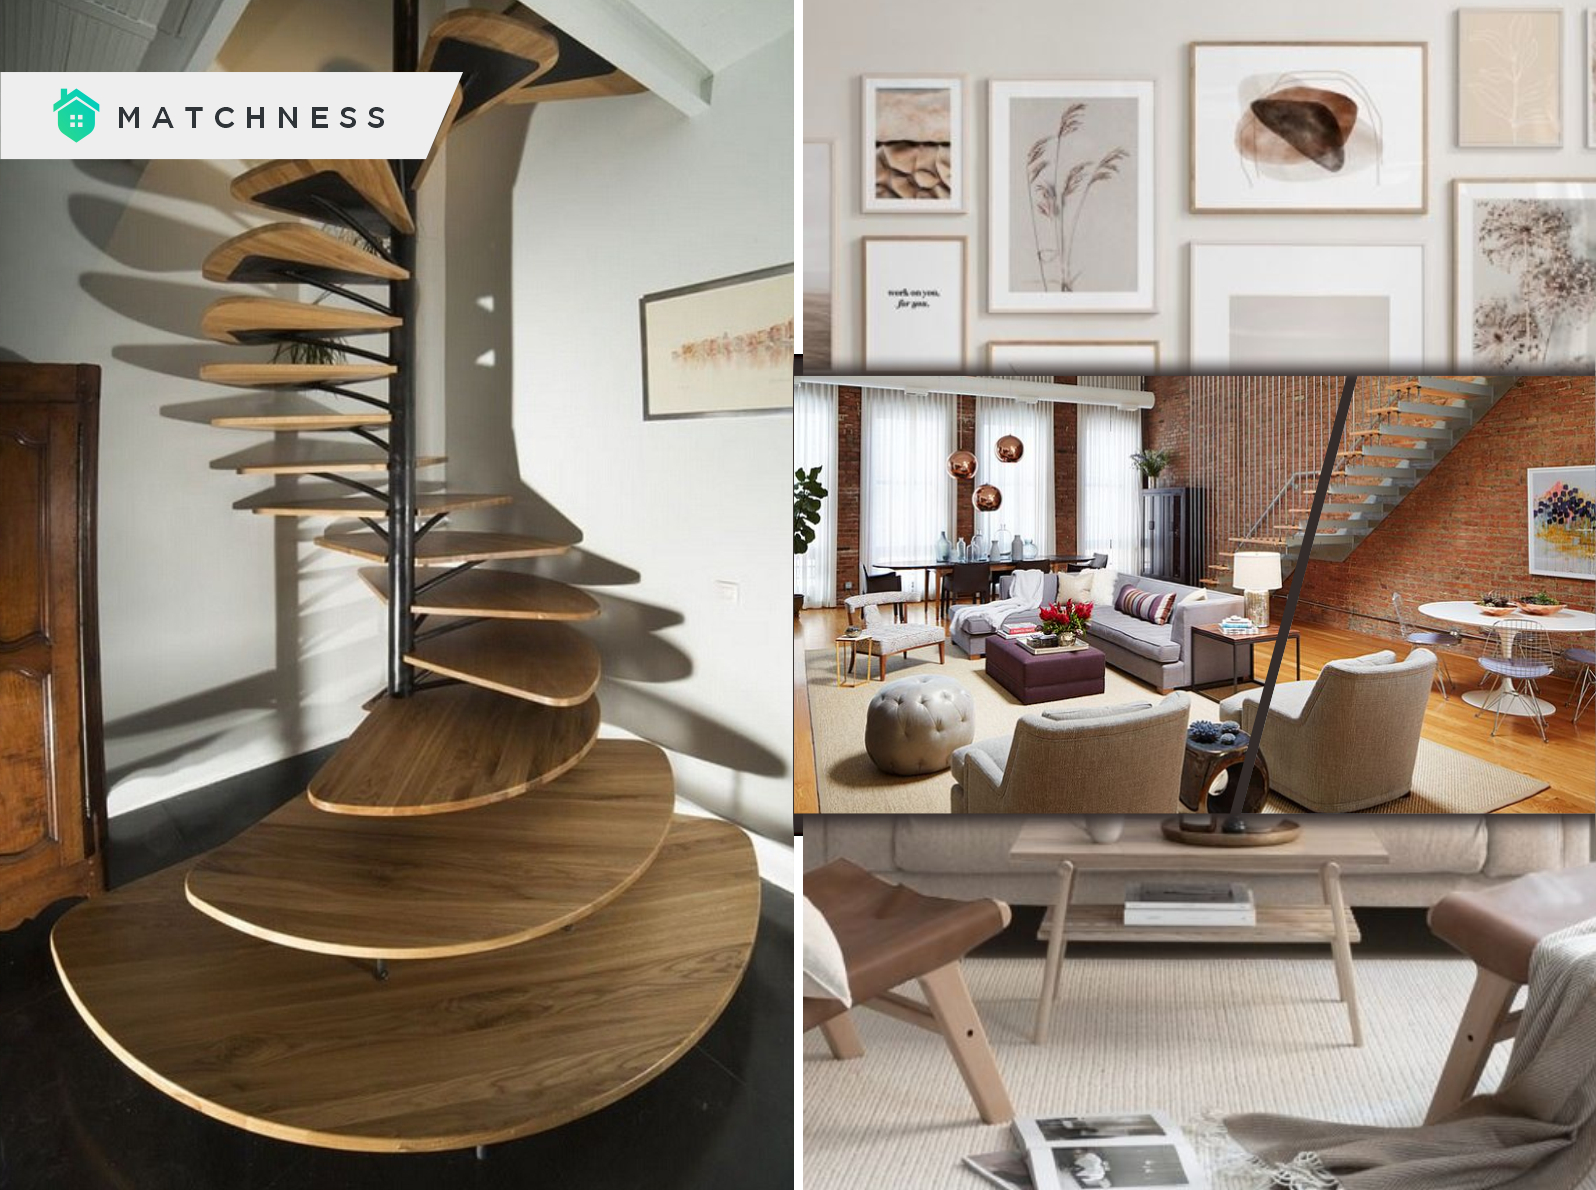 20 Earthy Yet Modern Home Decorations   Matchness.com